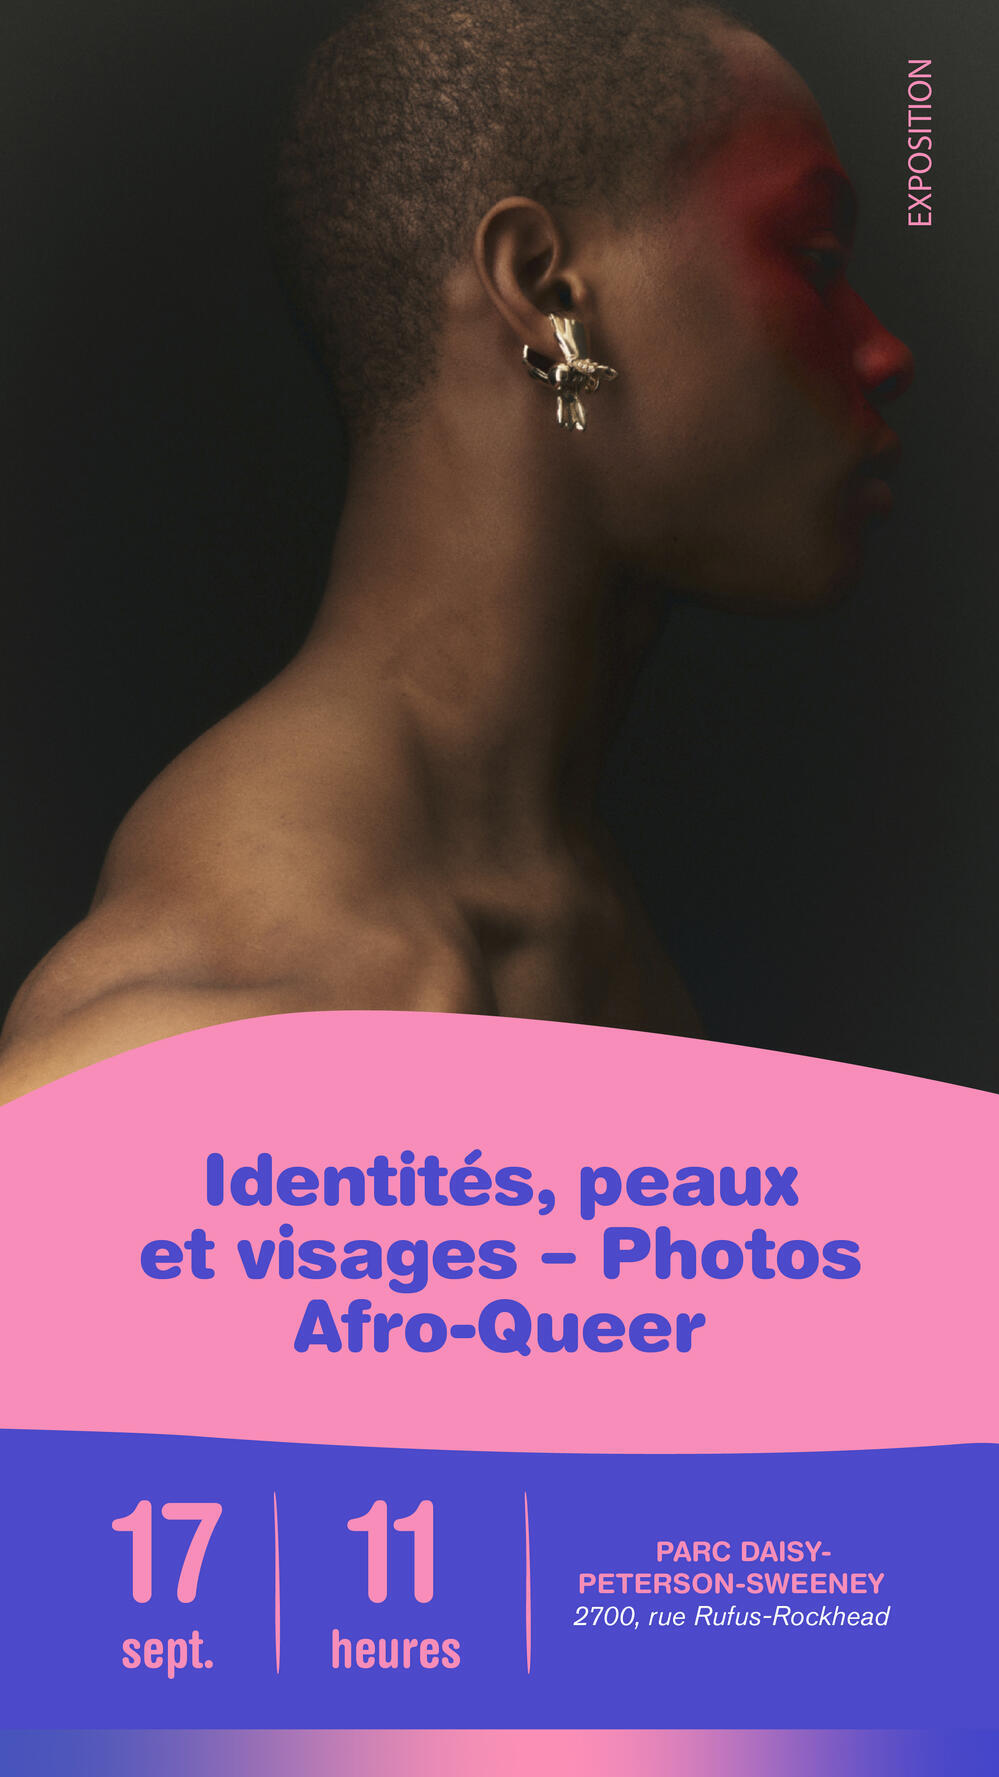 Identities, skins, and faces — a photographic look at Afro-Queer Identities